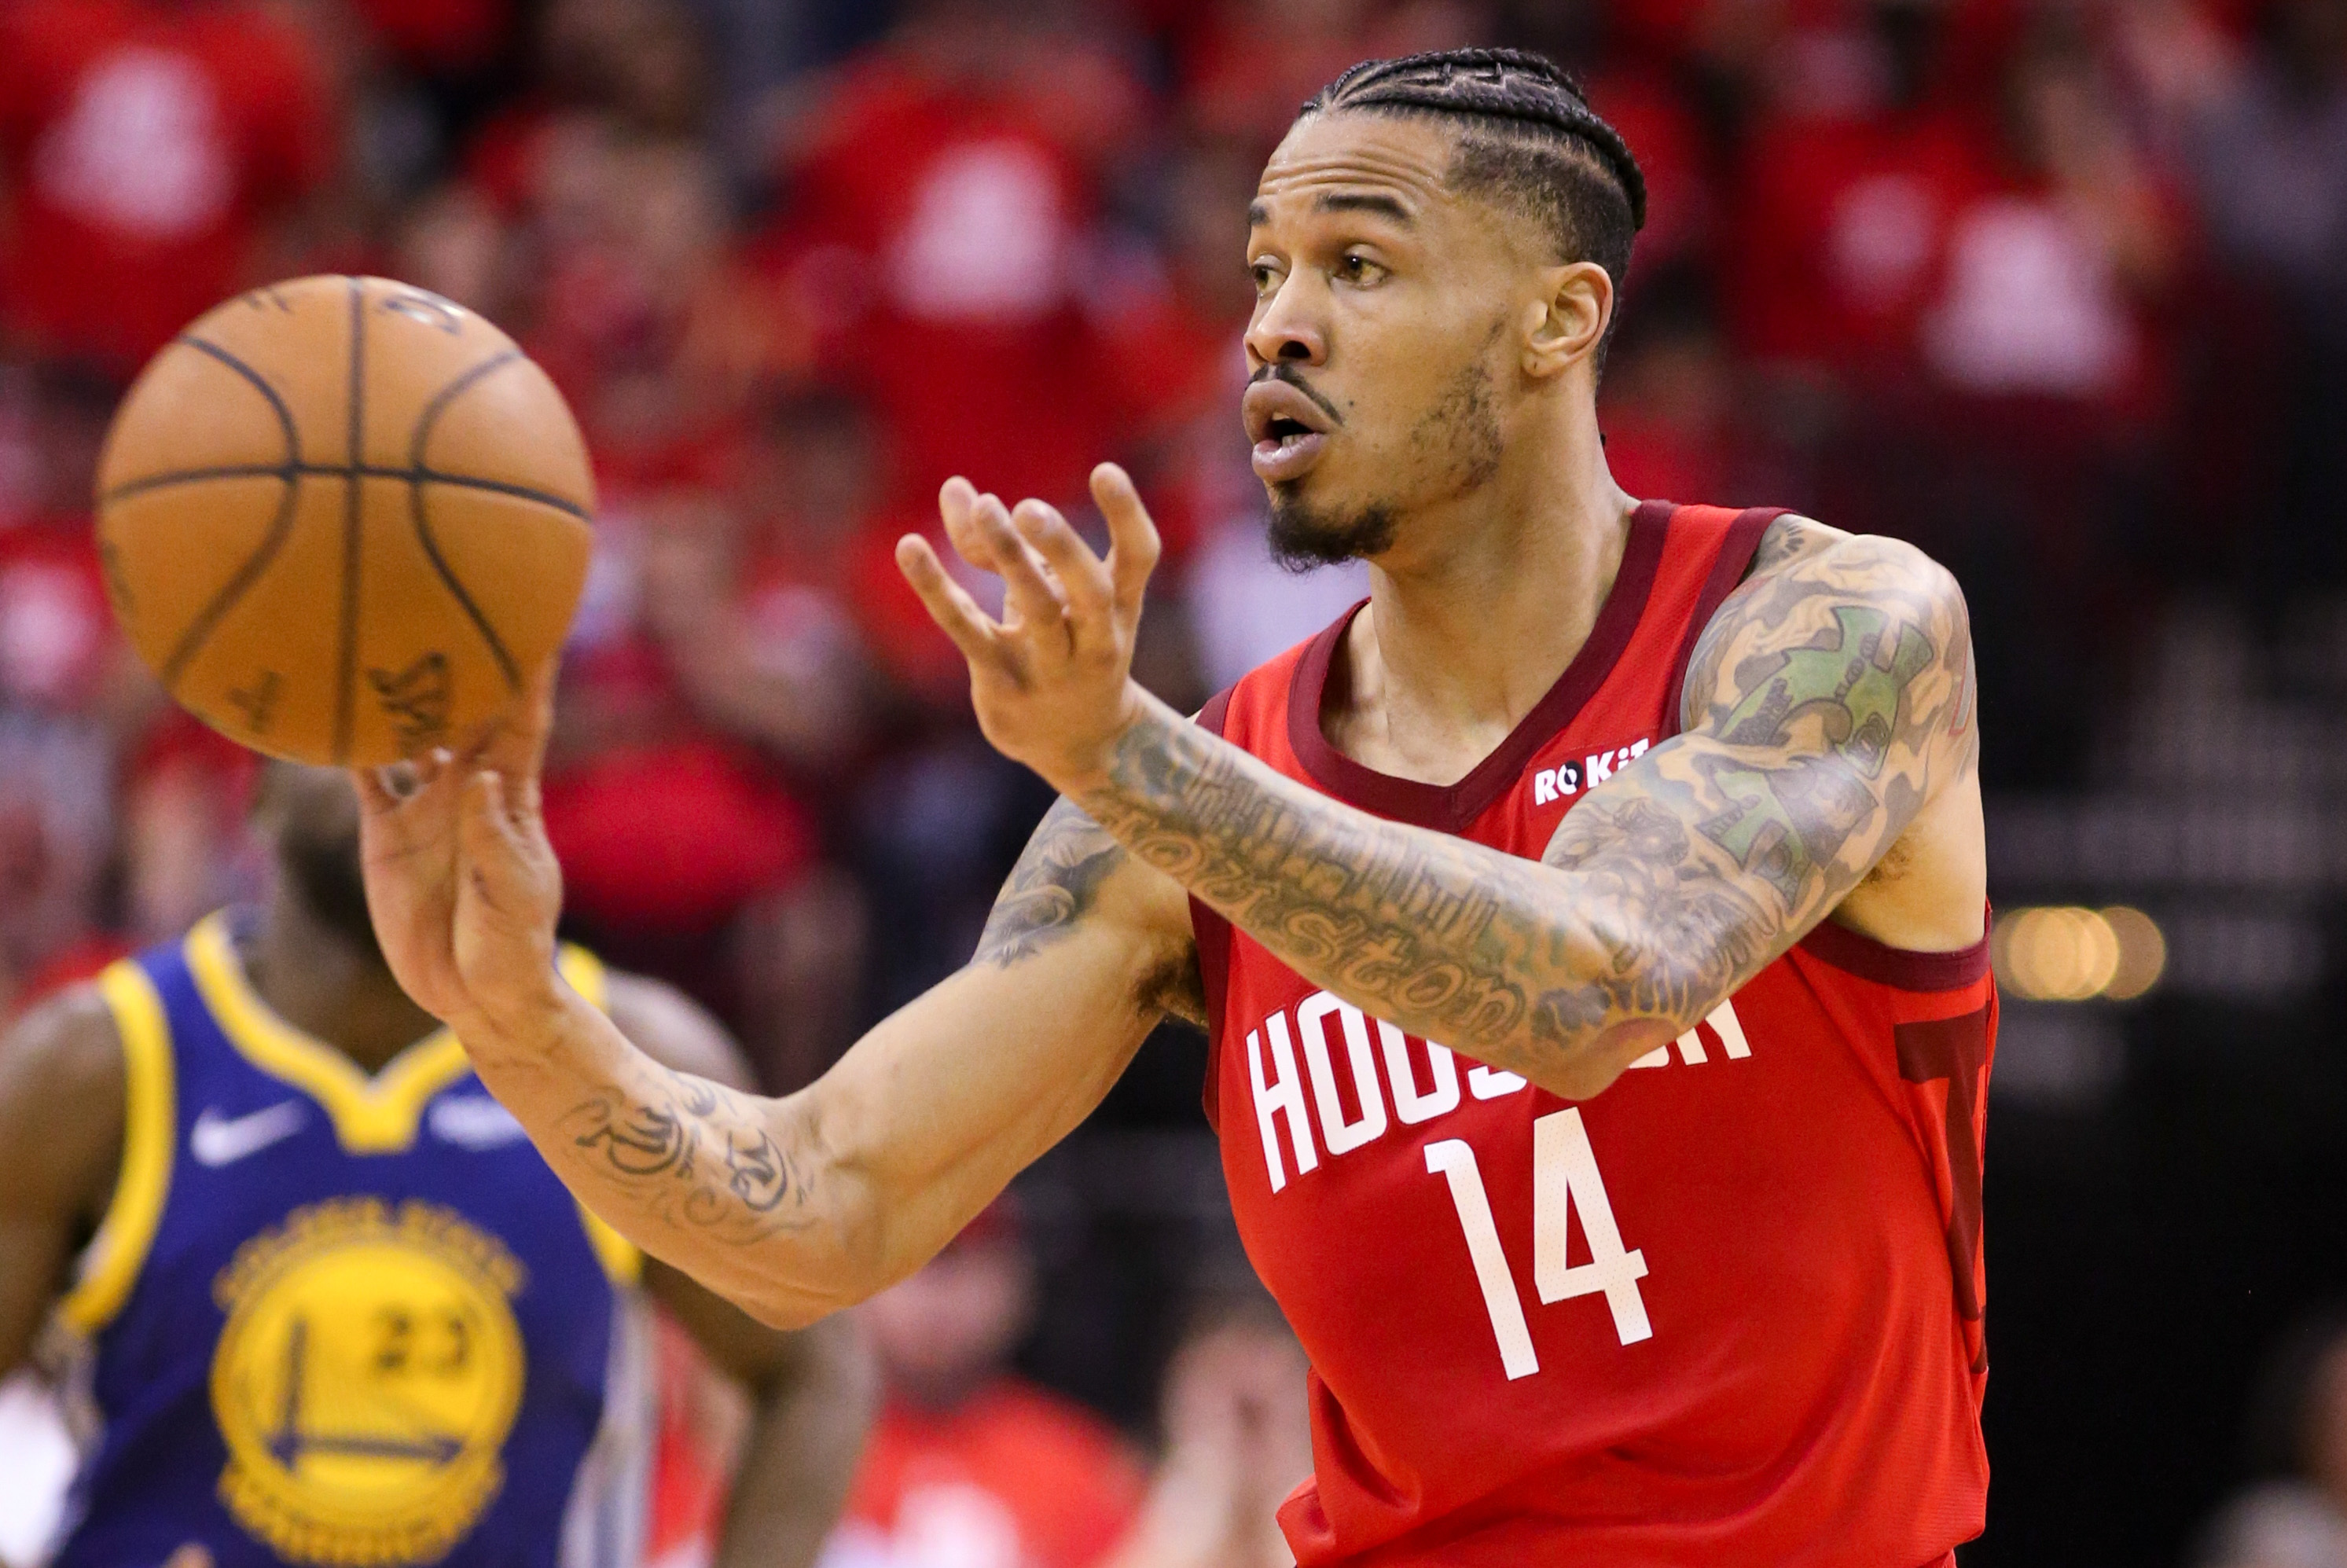 Gerald Green's love for the game of basketball remains unwavering